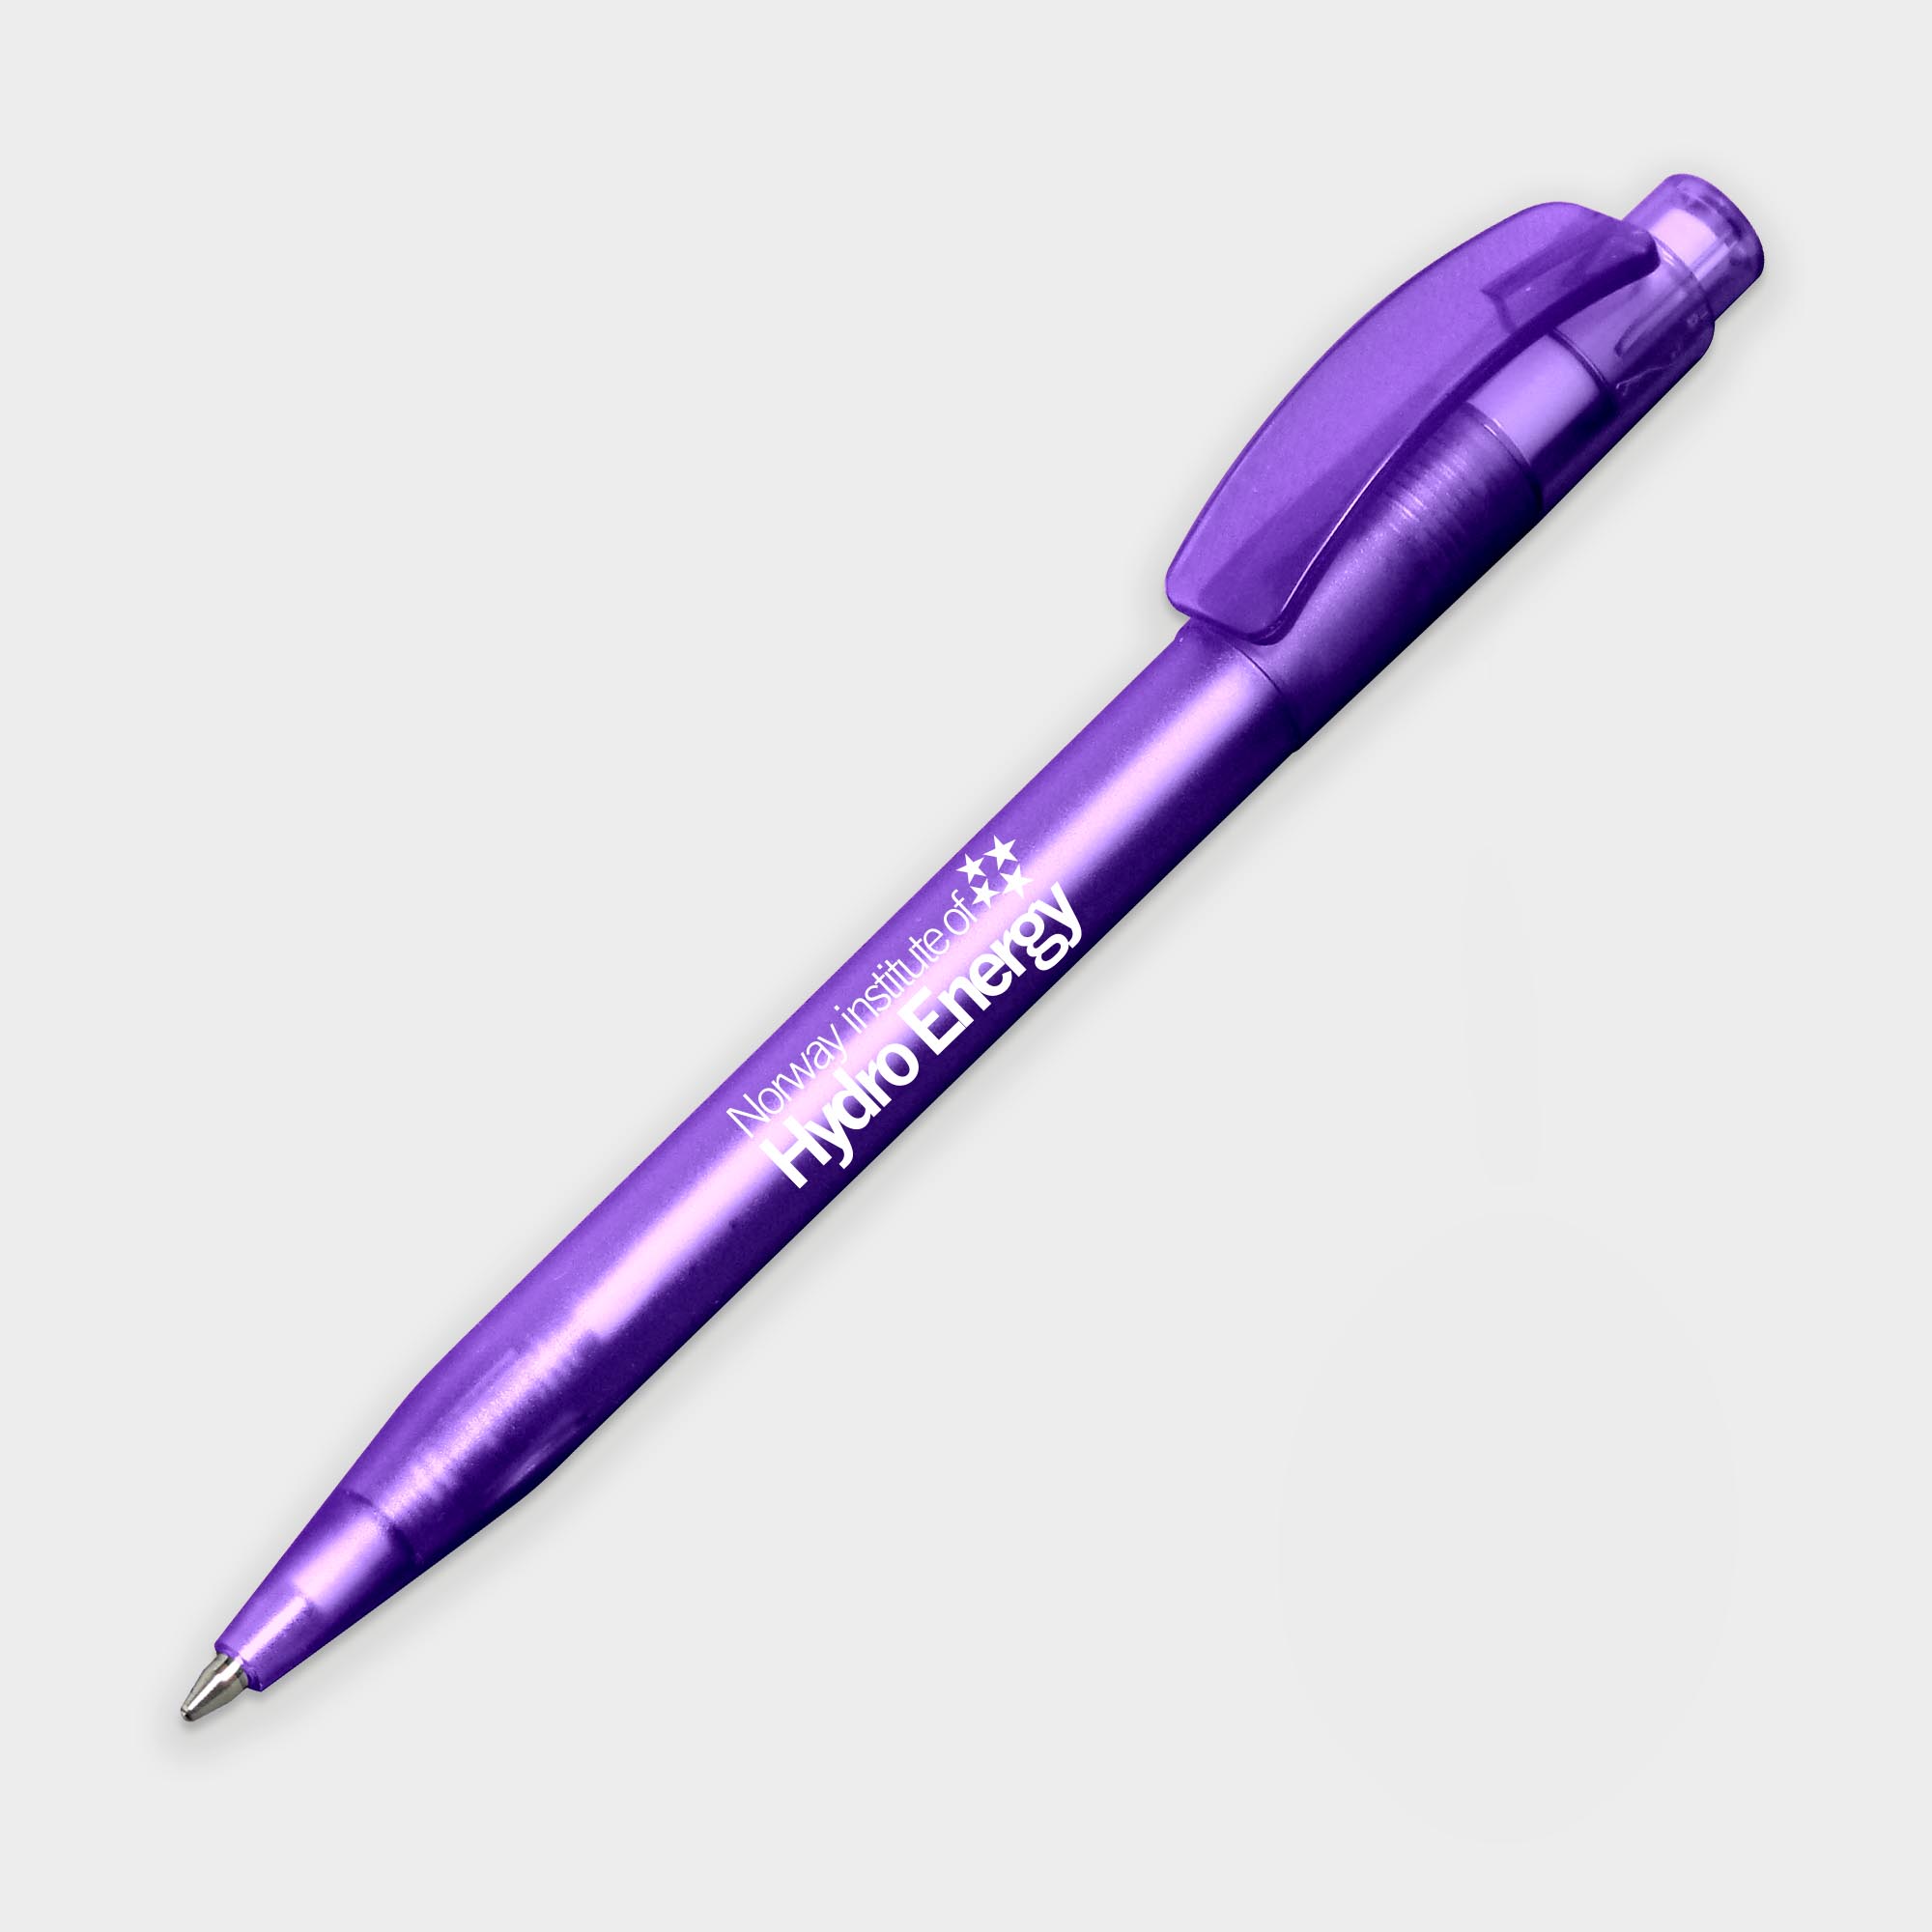 The Green & Good Indus Pen made from biodegradable plastic. Push button pen in a variety of colours. Black ink as standard. Purple